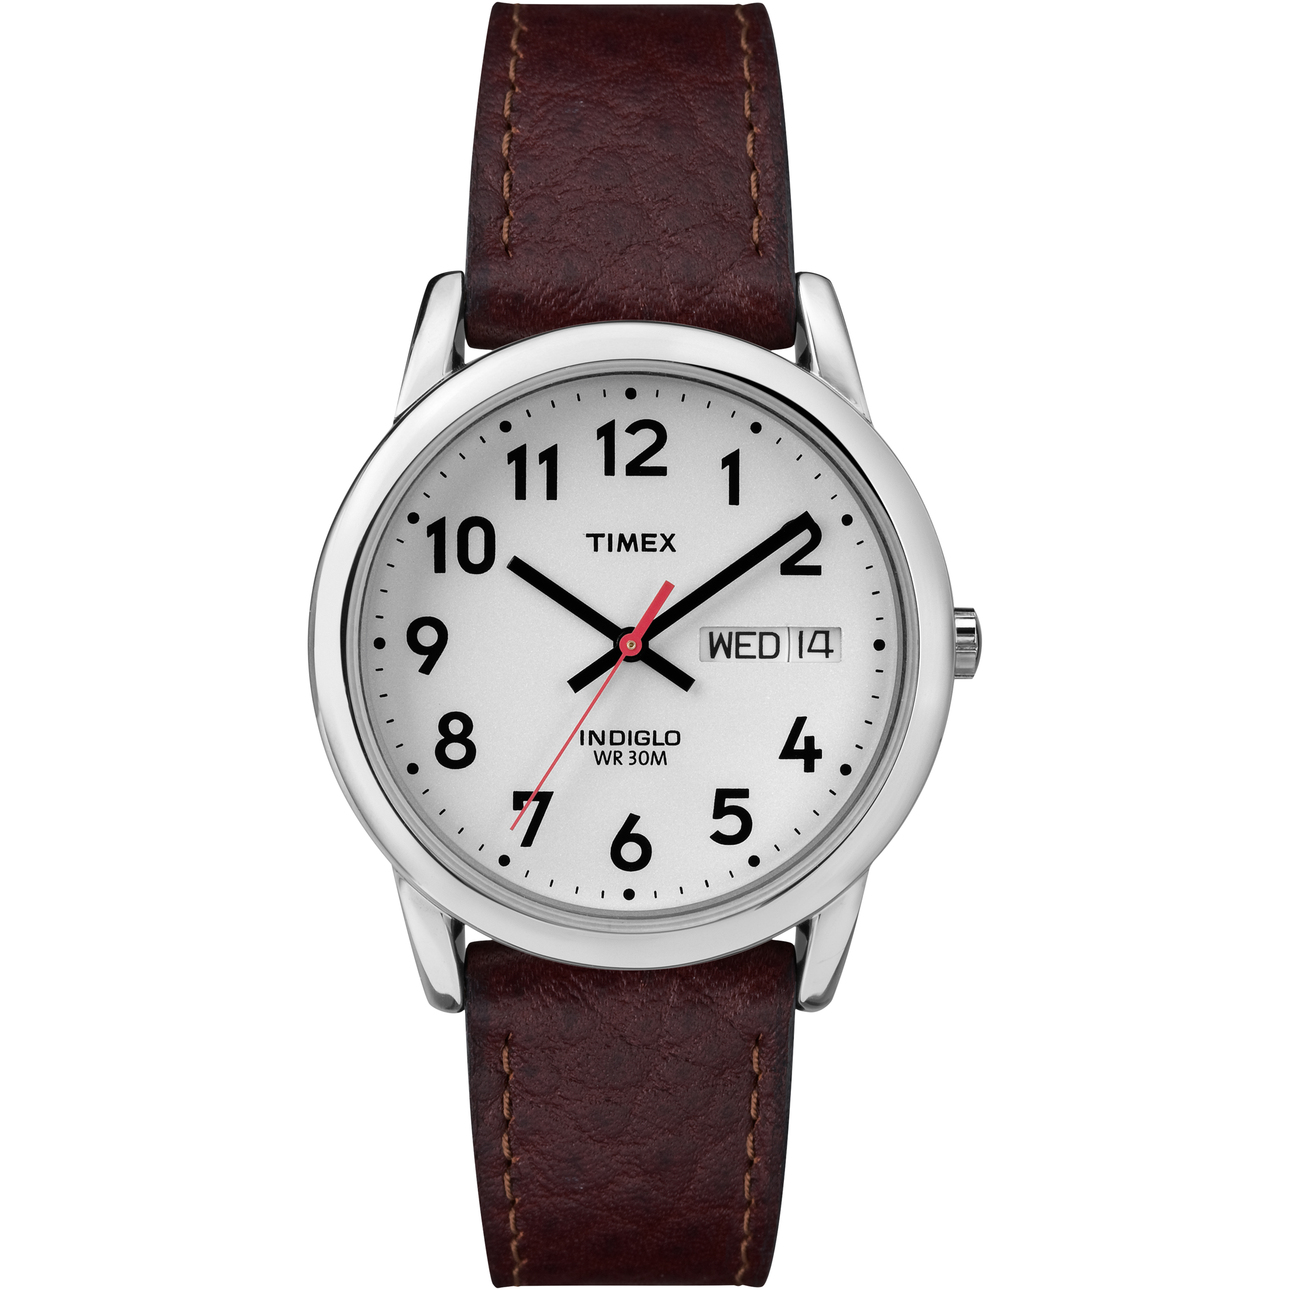 Timex Men's Easy Reader 35mm Day-Date Watch – Silver-Tone Case White Dial with Dark Brown Leather Strap - image 1 of 6